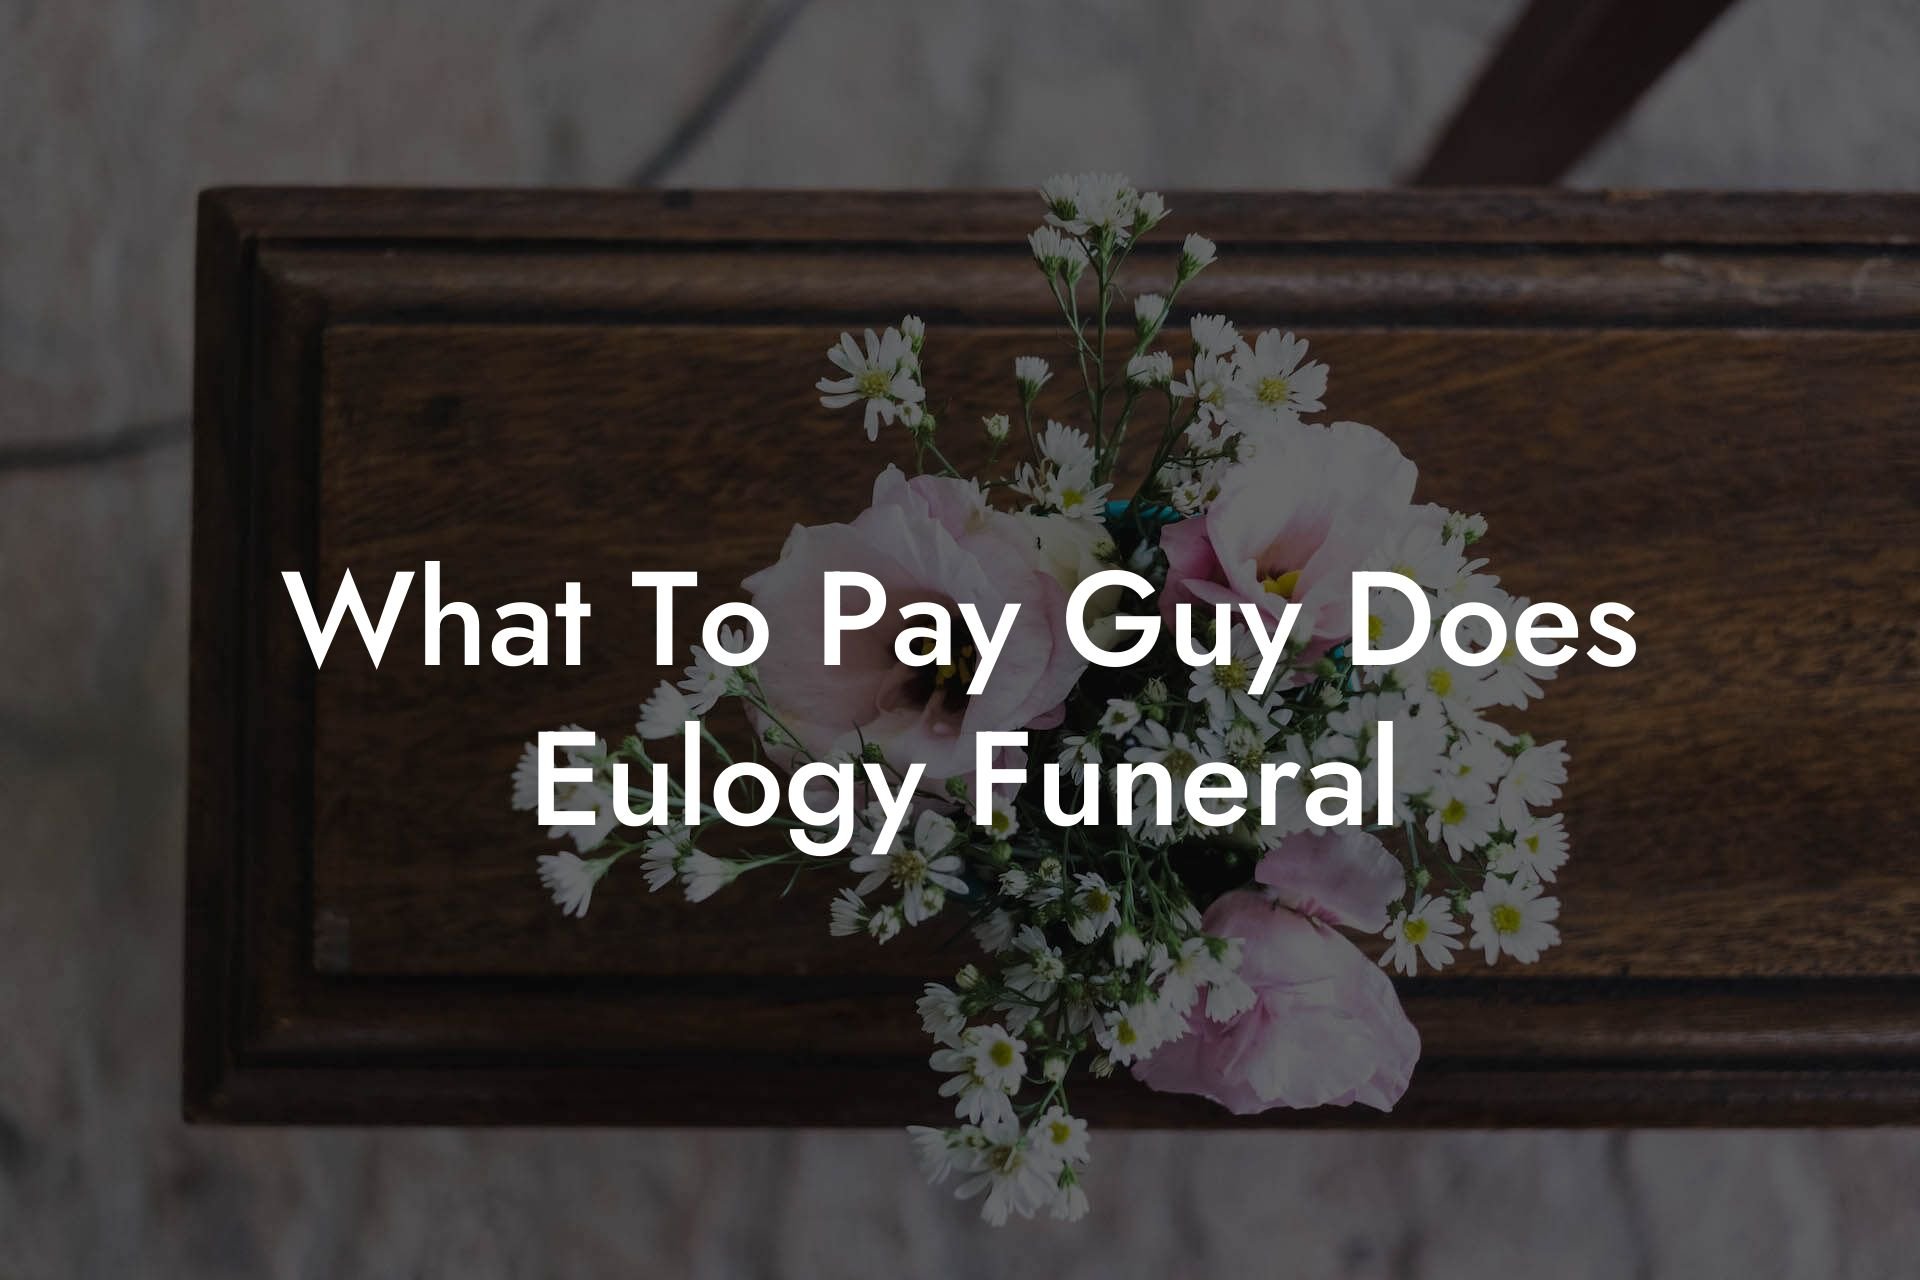 What To Pay Guy Does Eulogy Funeral